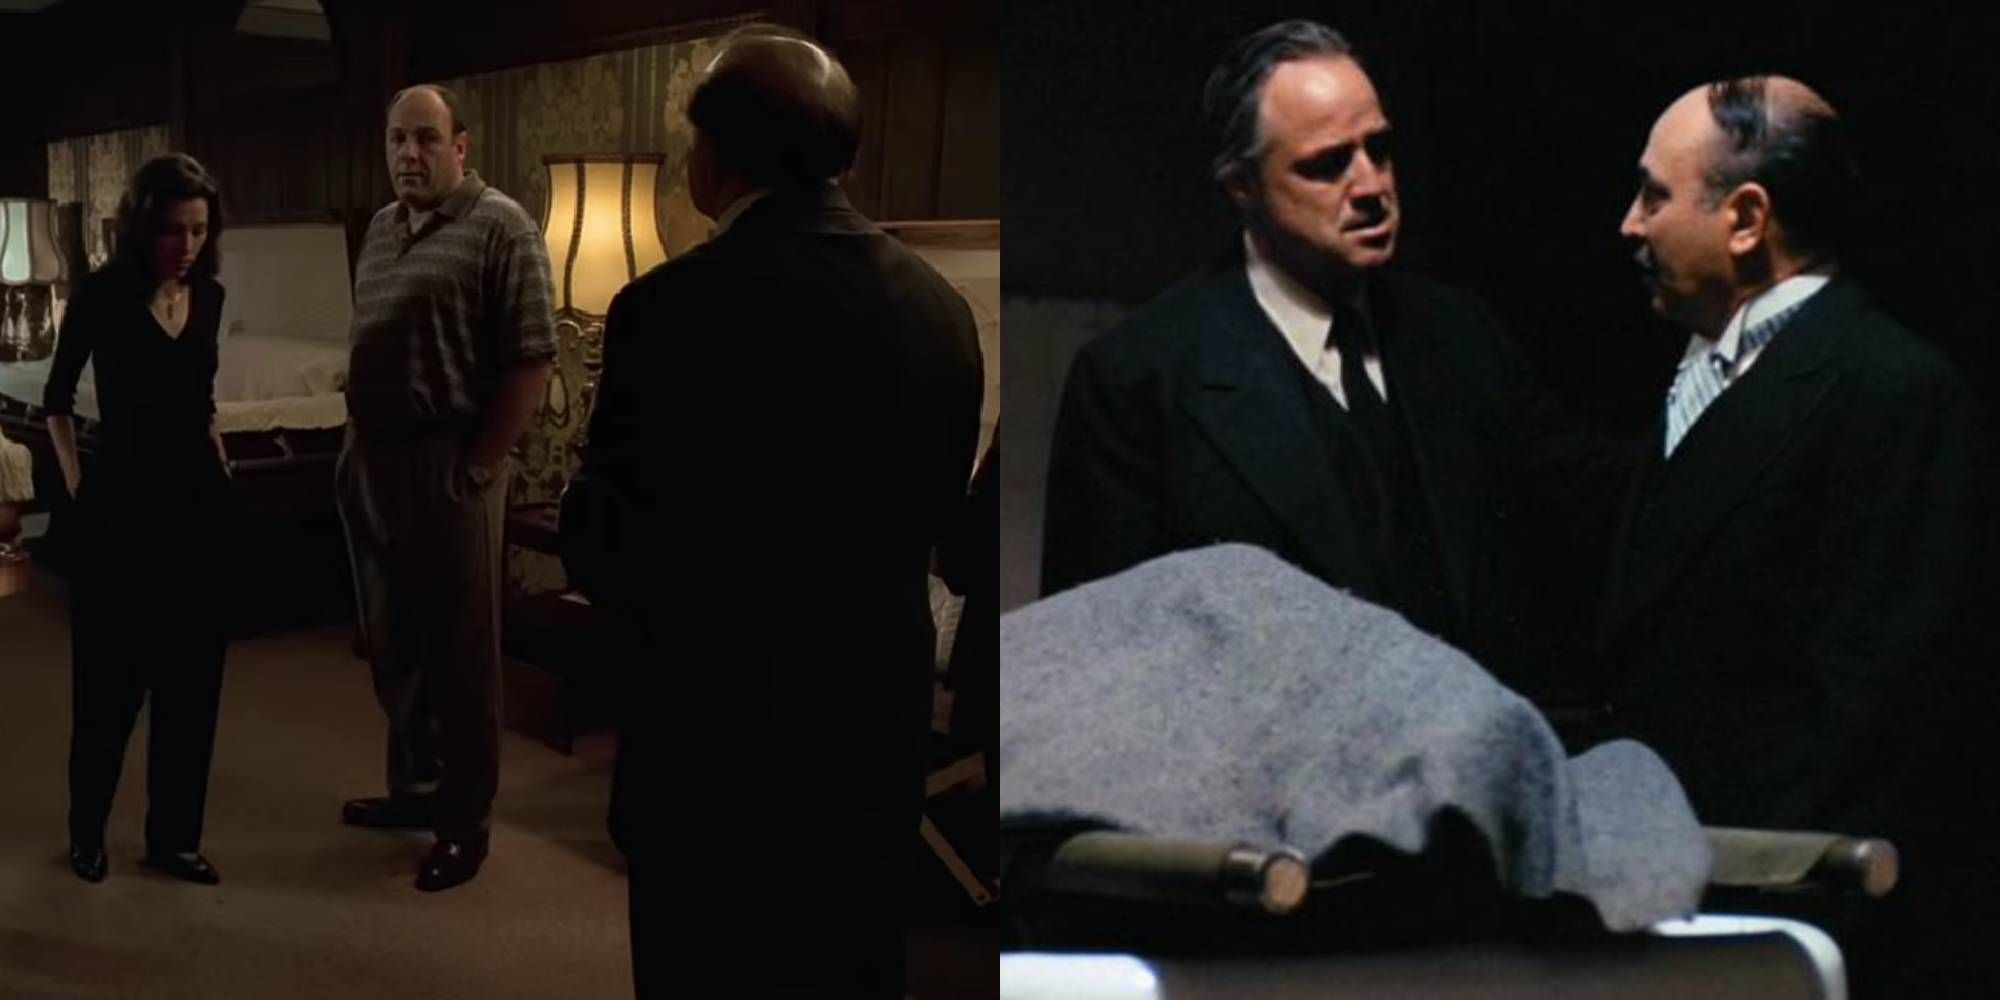 The funeral director scenes from both The Sopranos and The Godfather